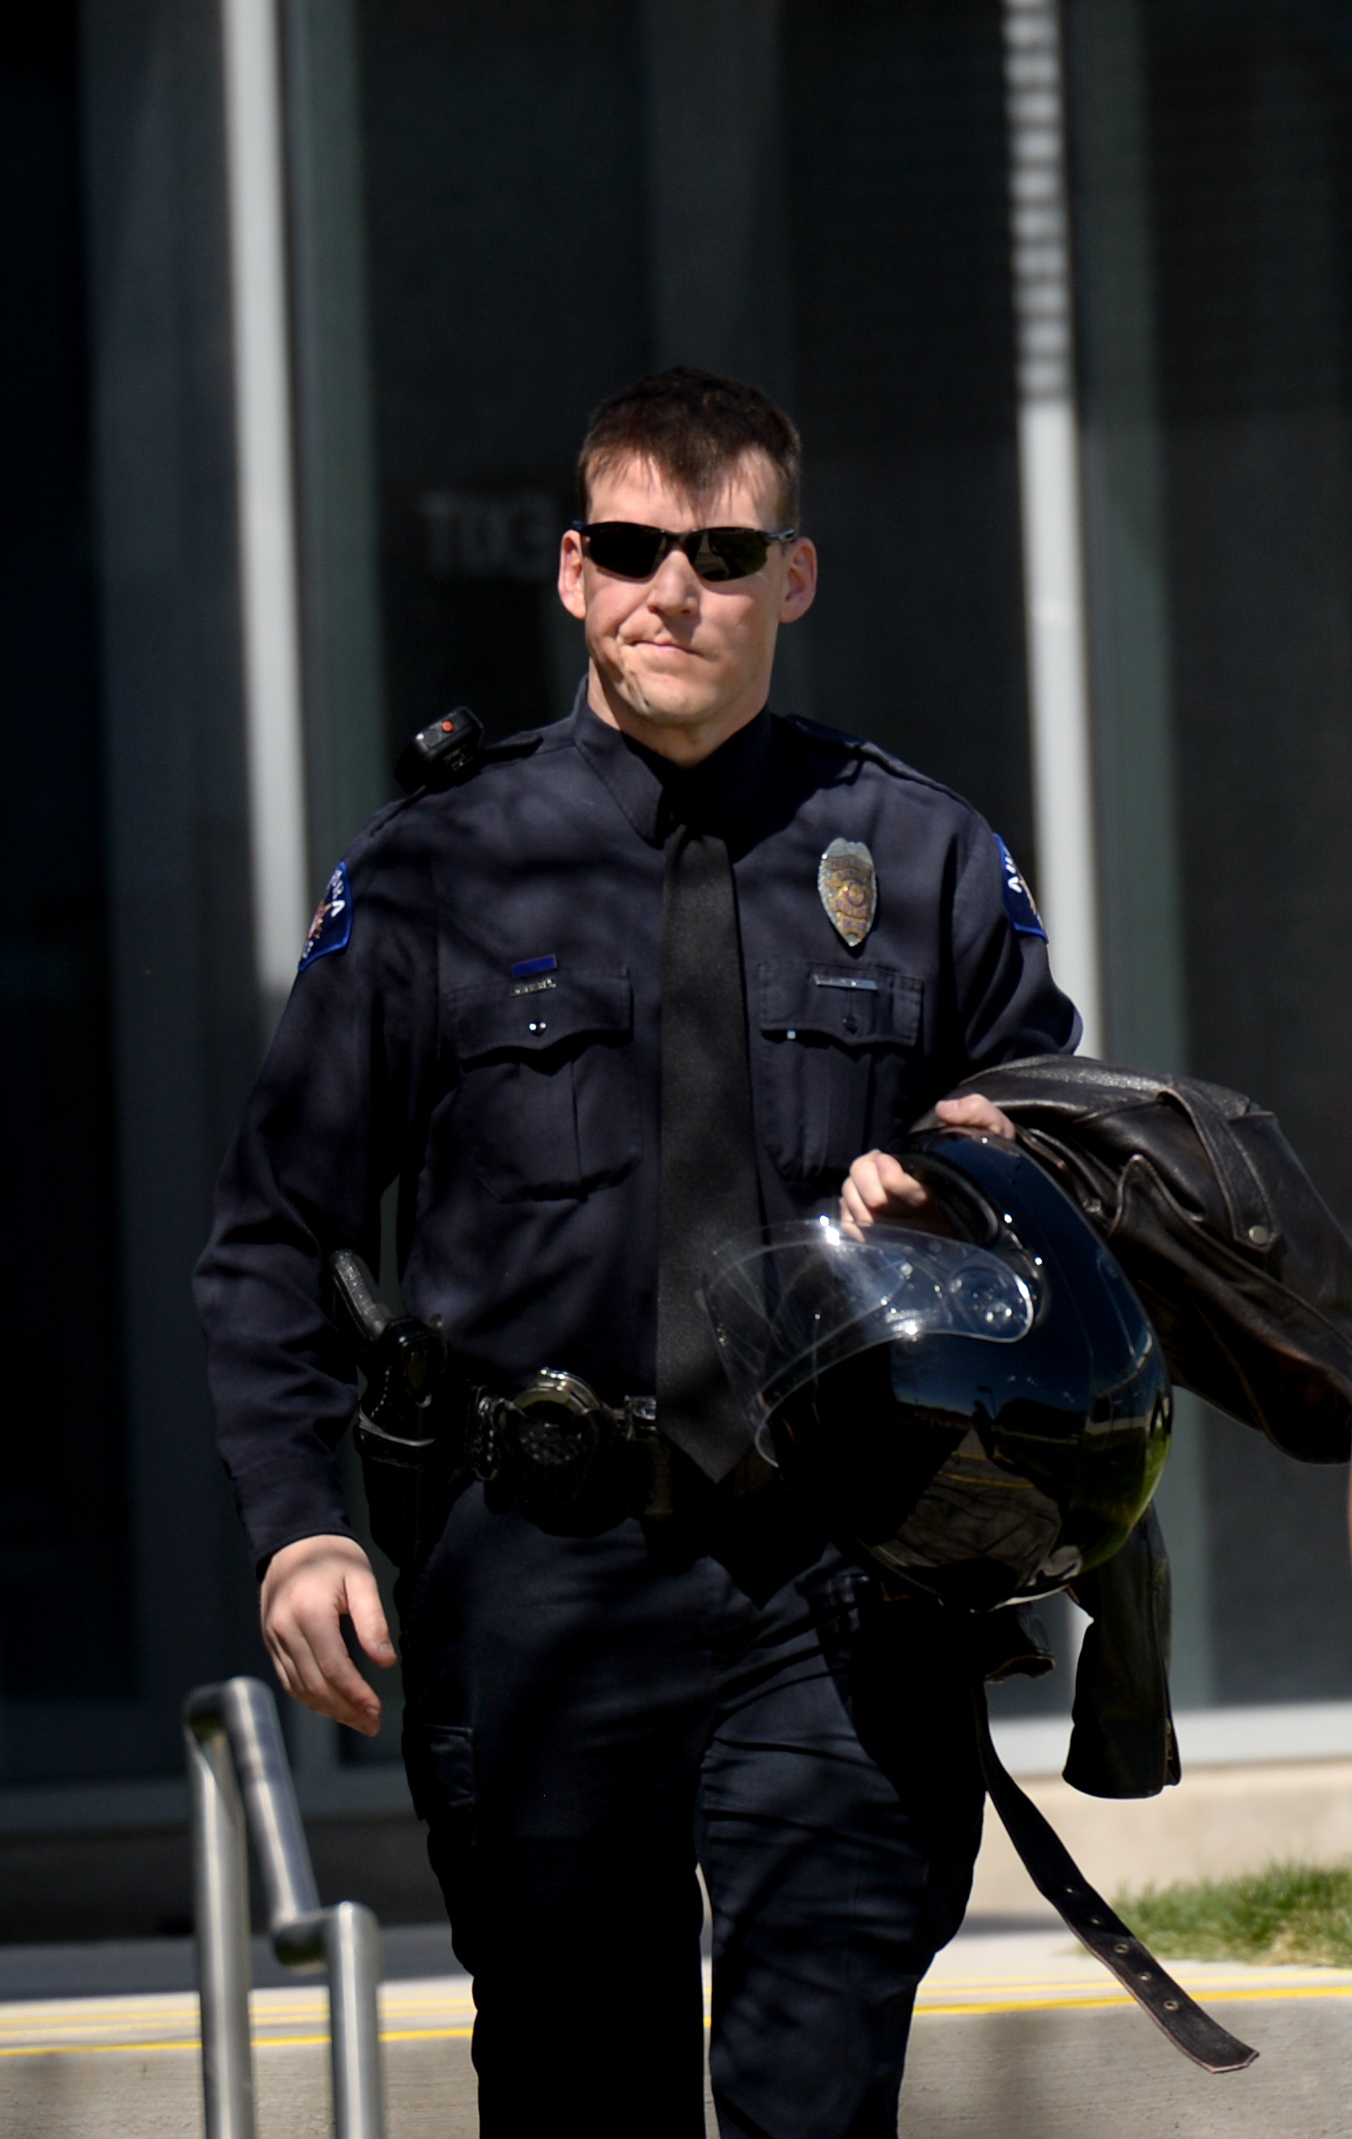 PHOTO: Aurora police officer Jason Oviatt leaves court after testifying in James Holmes' trial at the Arapahoe County Justice Center in Centennial, Colo., April 30, 2015.